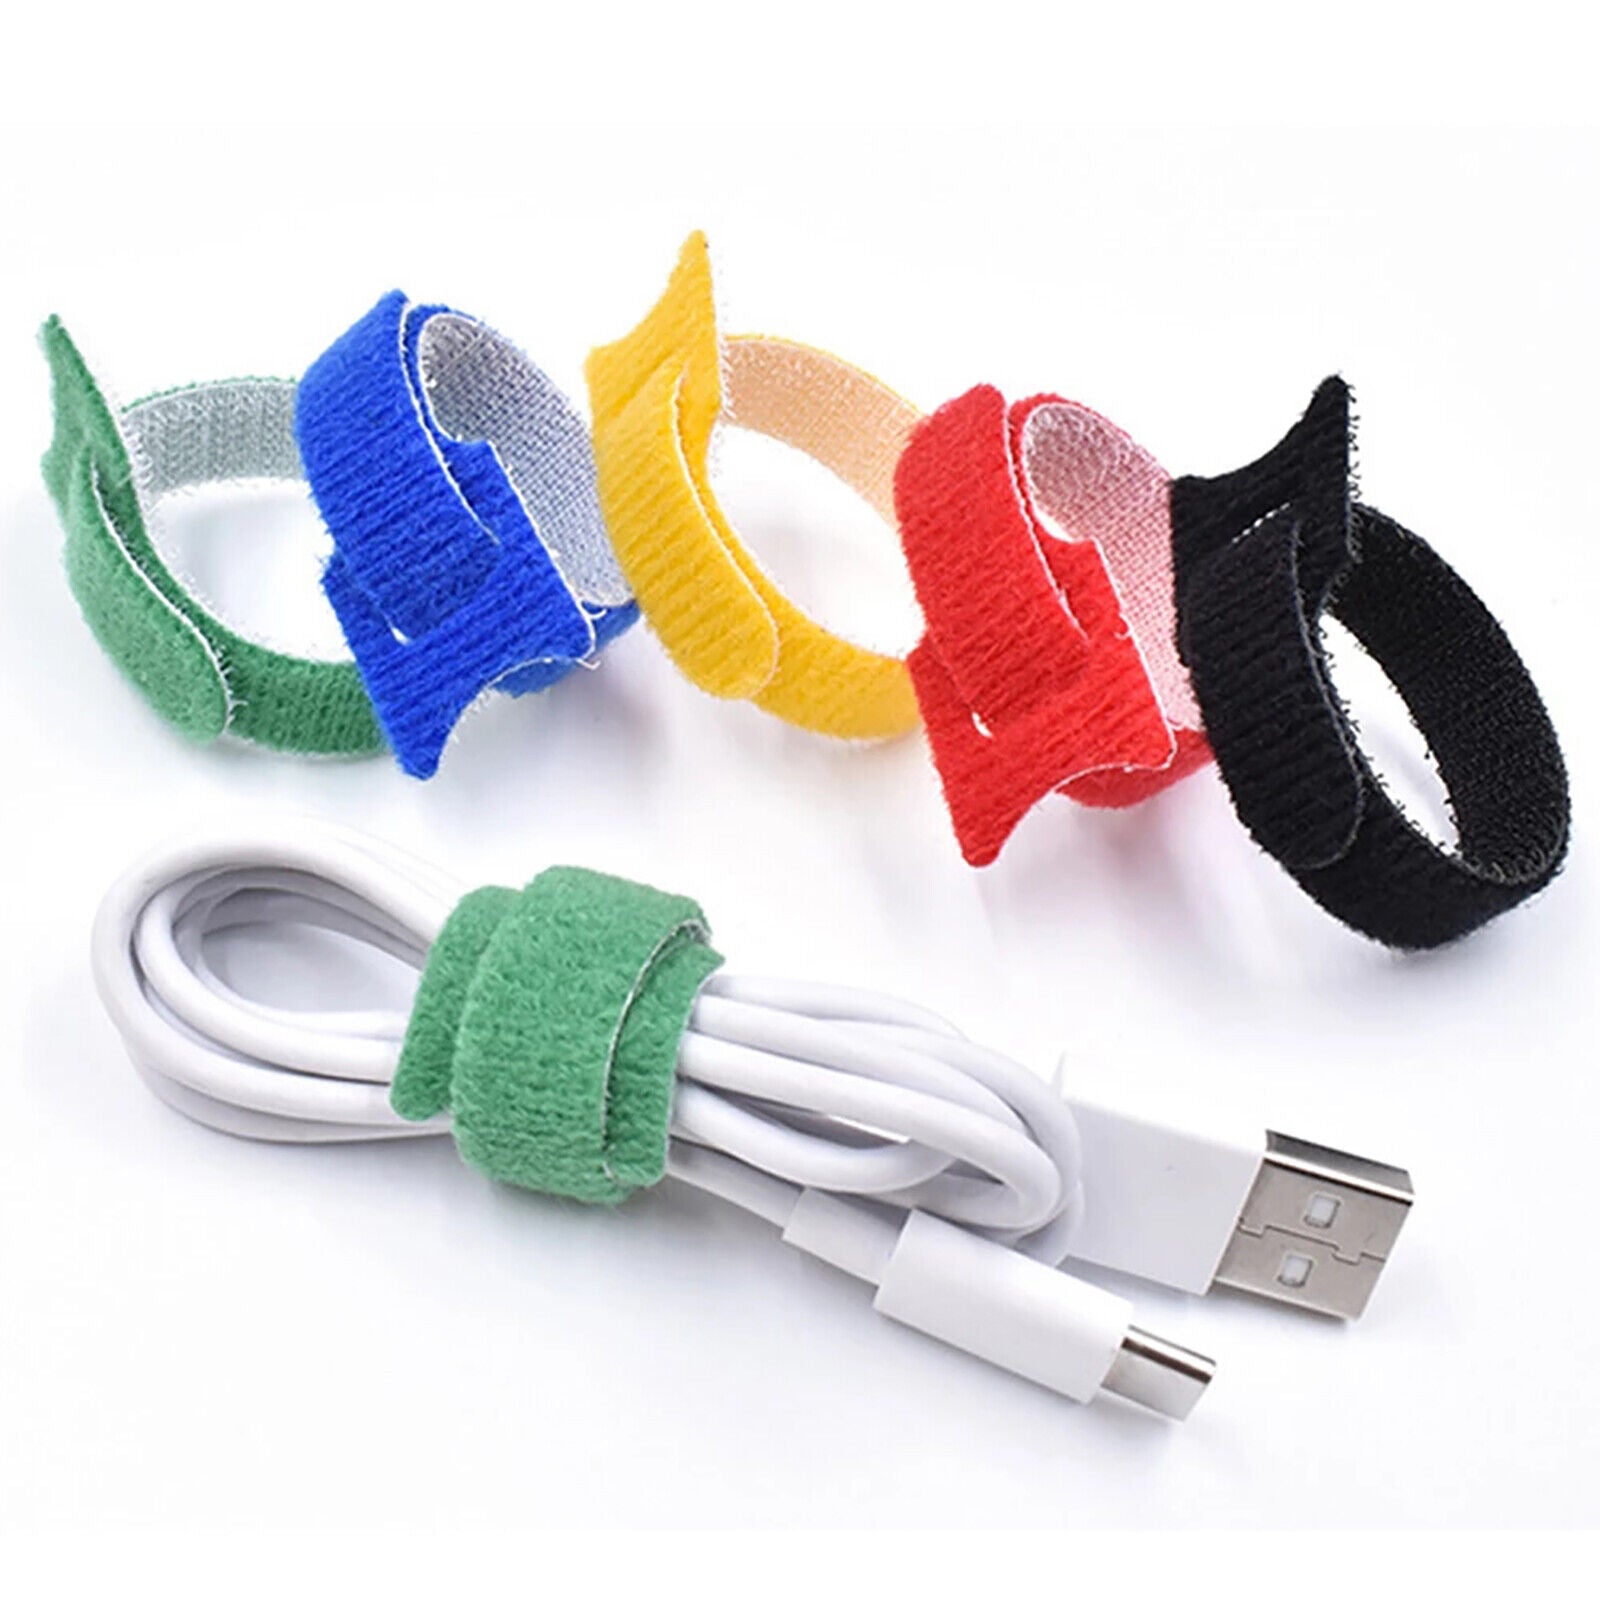 Hook and Loop Cable Ties Reusable Magic Cords Organiser Strap Tidy